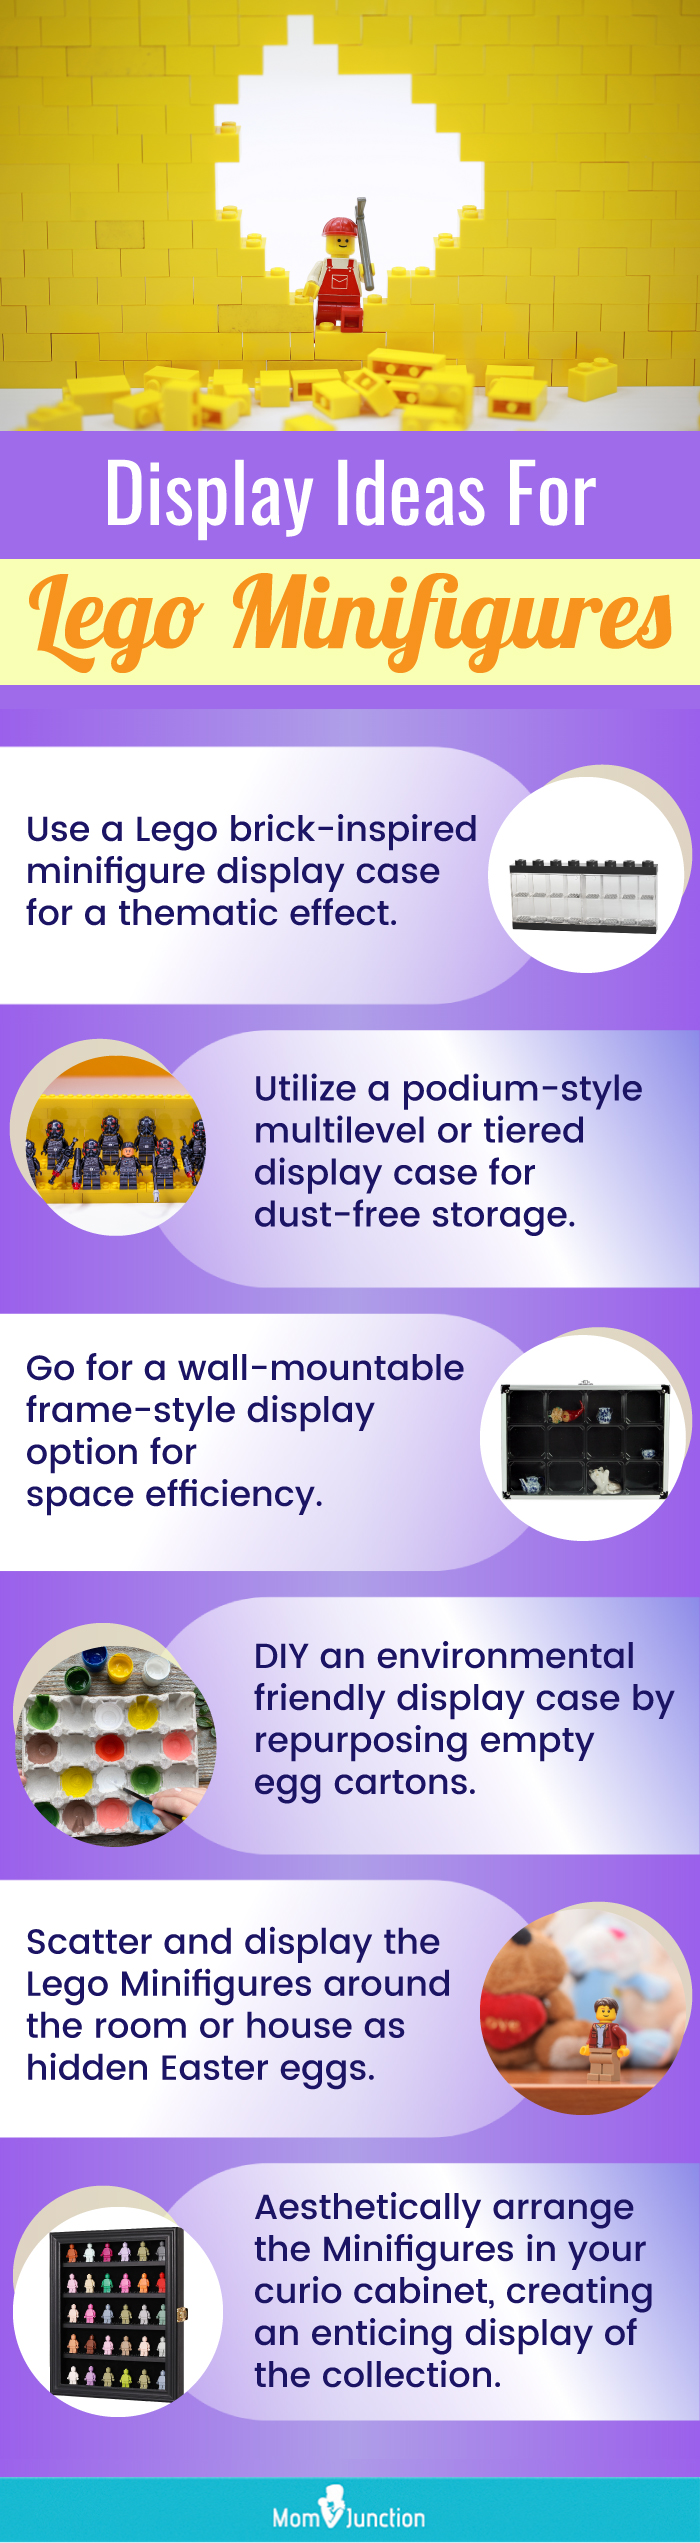 Display Ideas For Lego Minifigures (infographic)